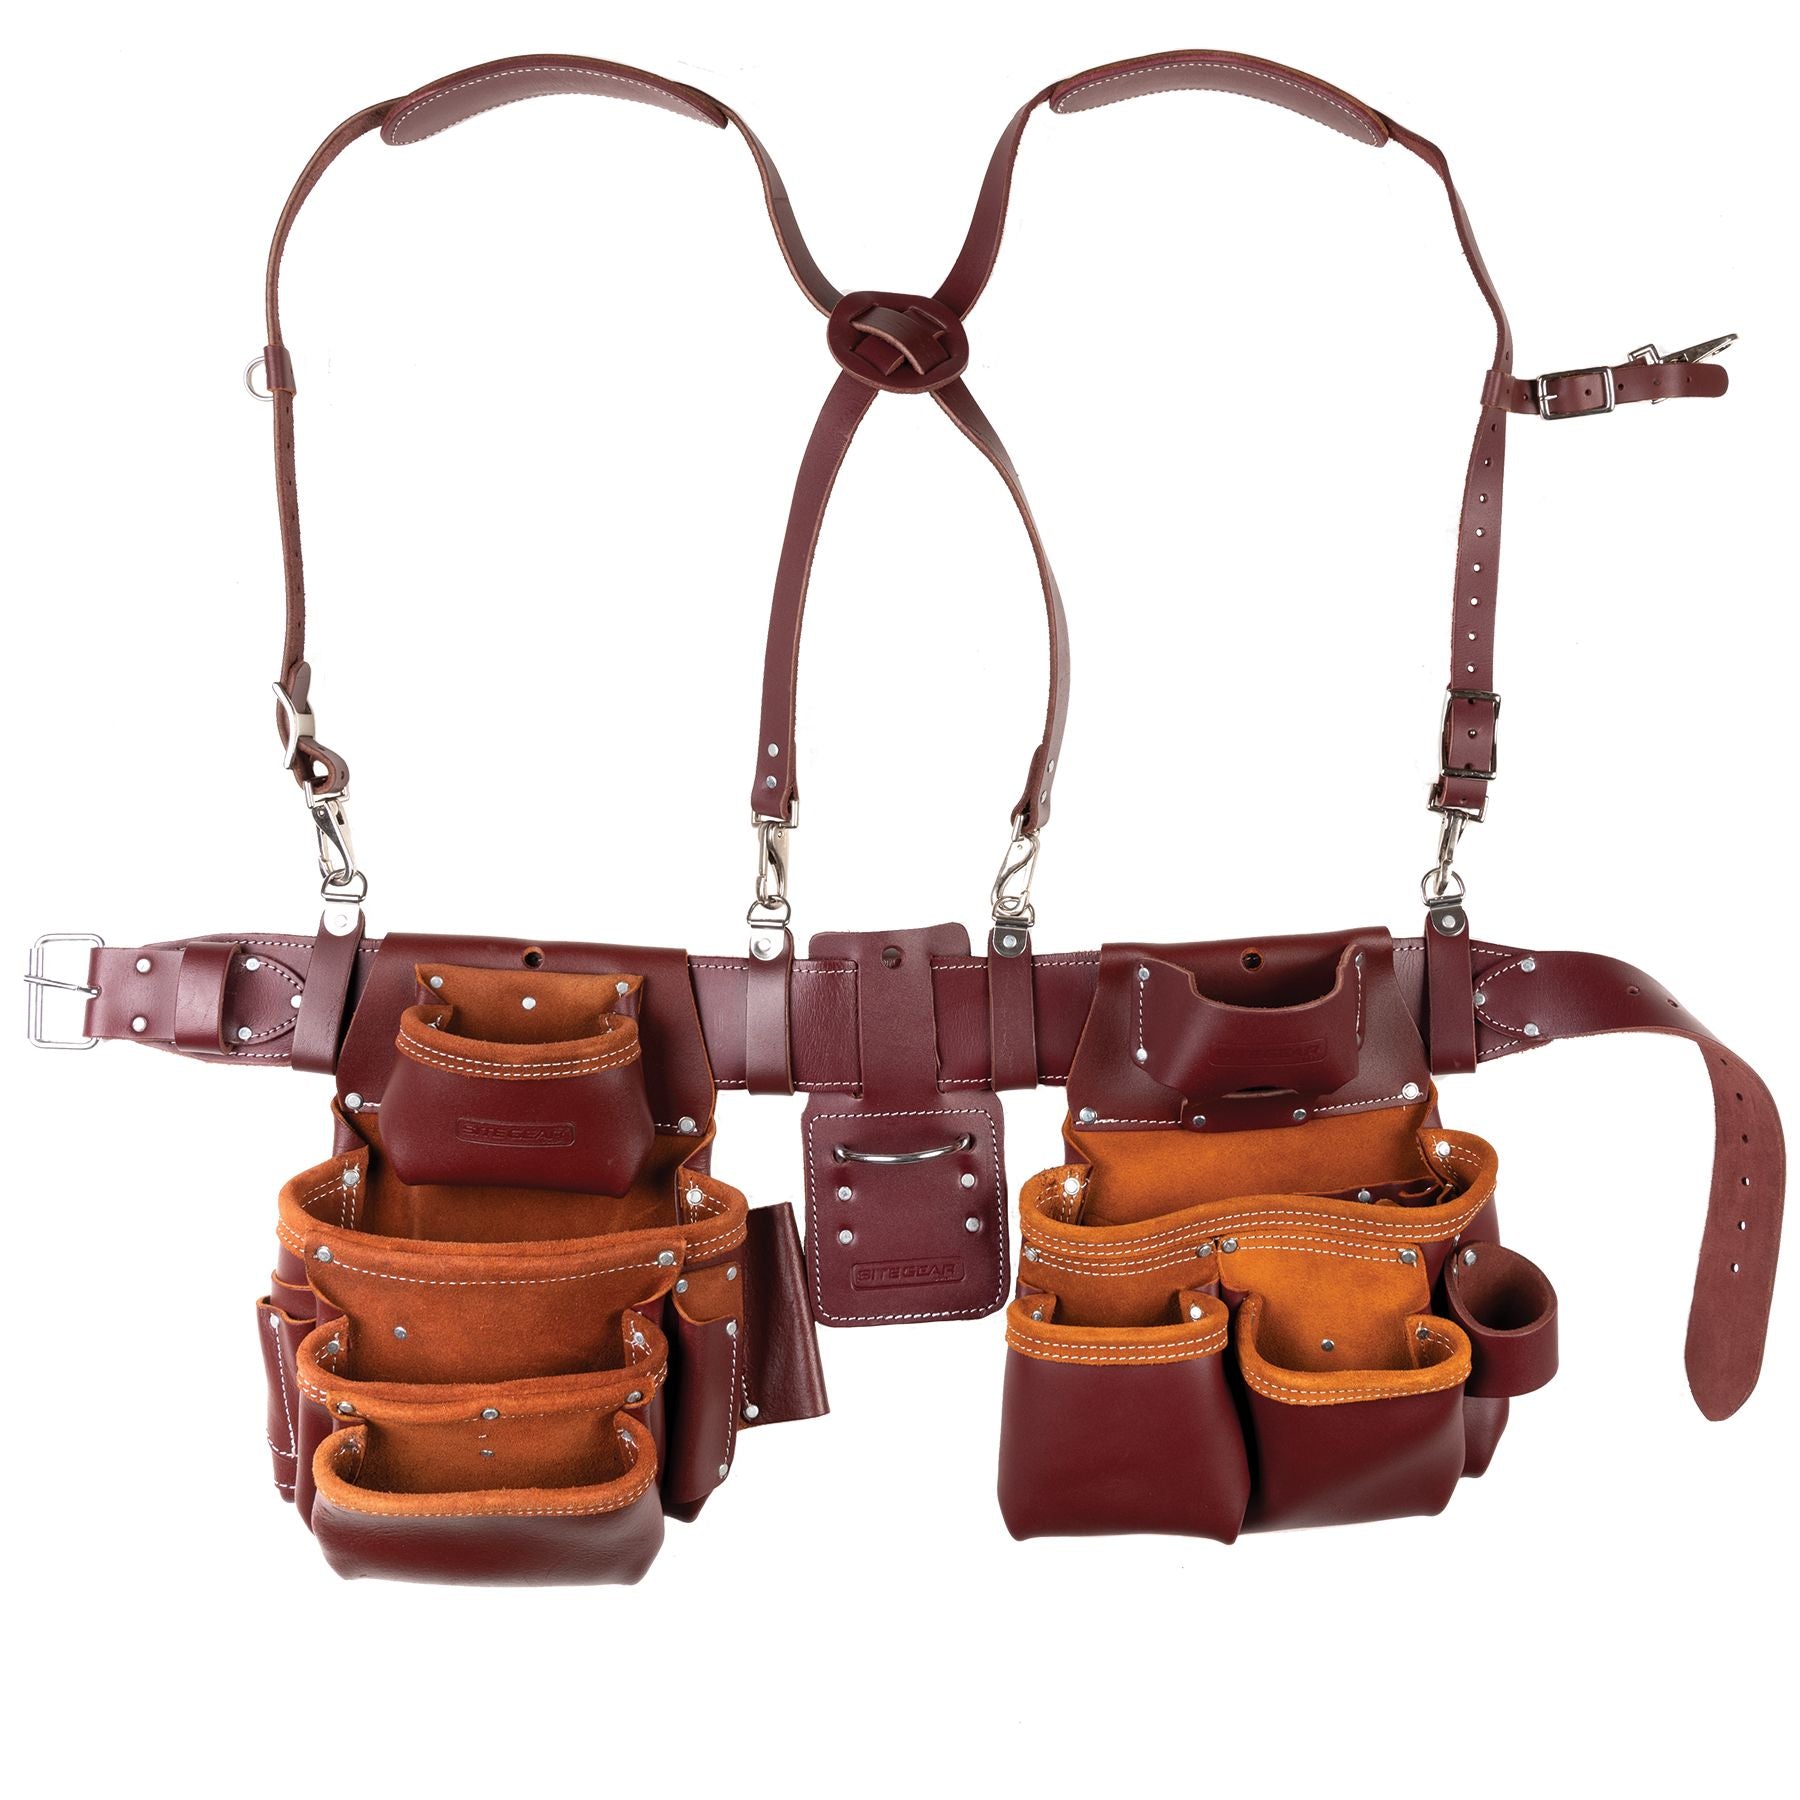 SitePro 51-15089S-L 7 Pouch Framer Complete Set, with Suspenders